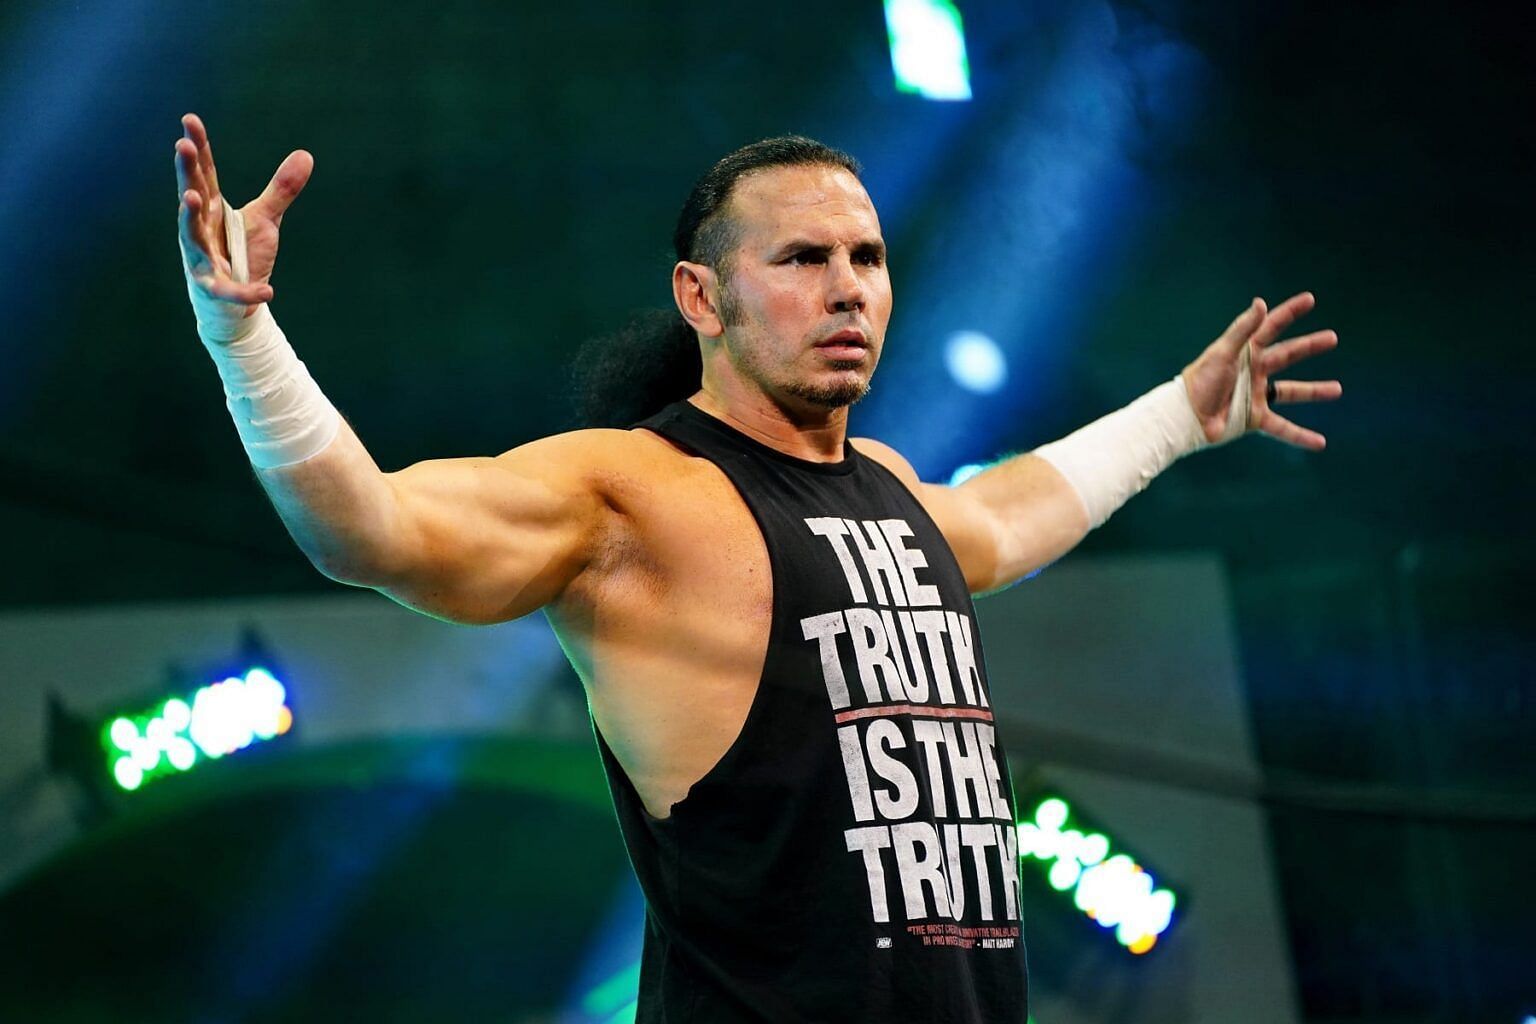 Matt Hardy thinks this wrestler does not understand reality